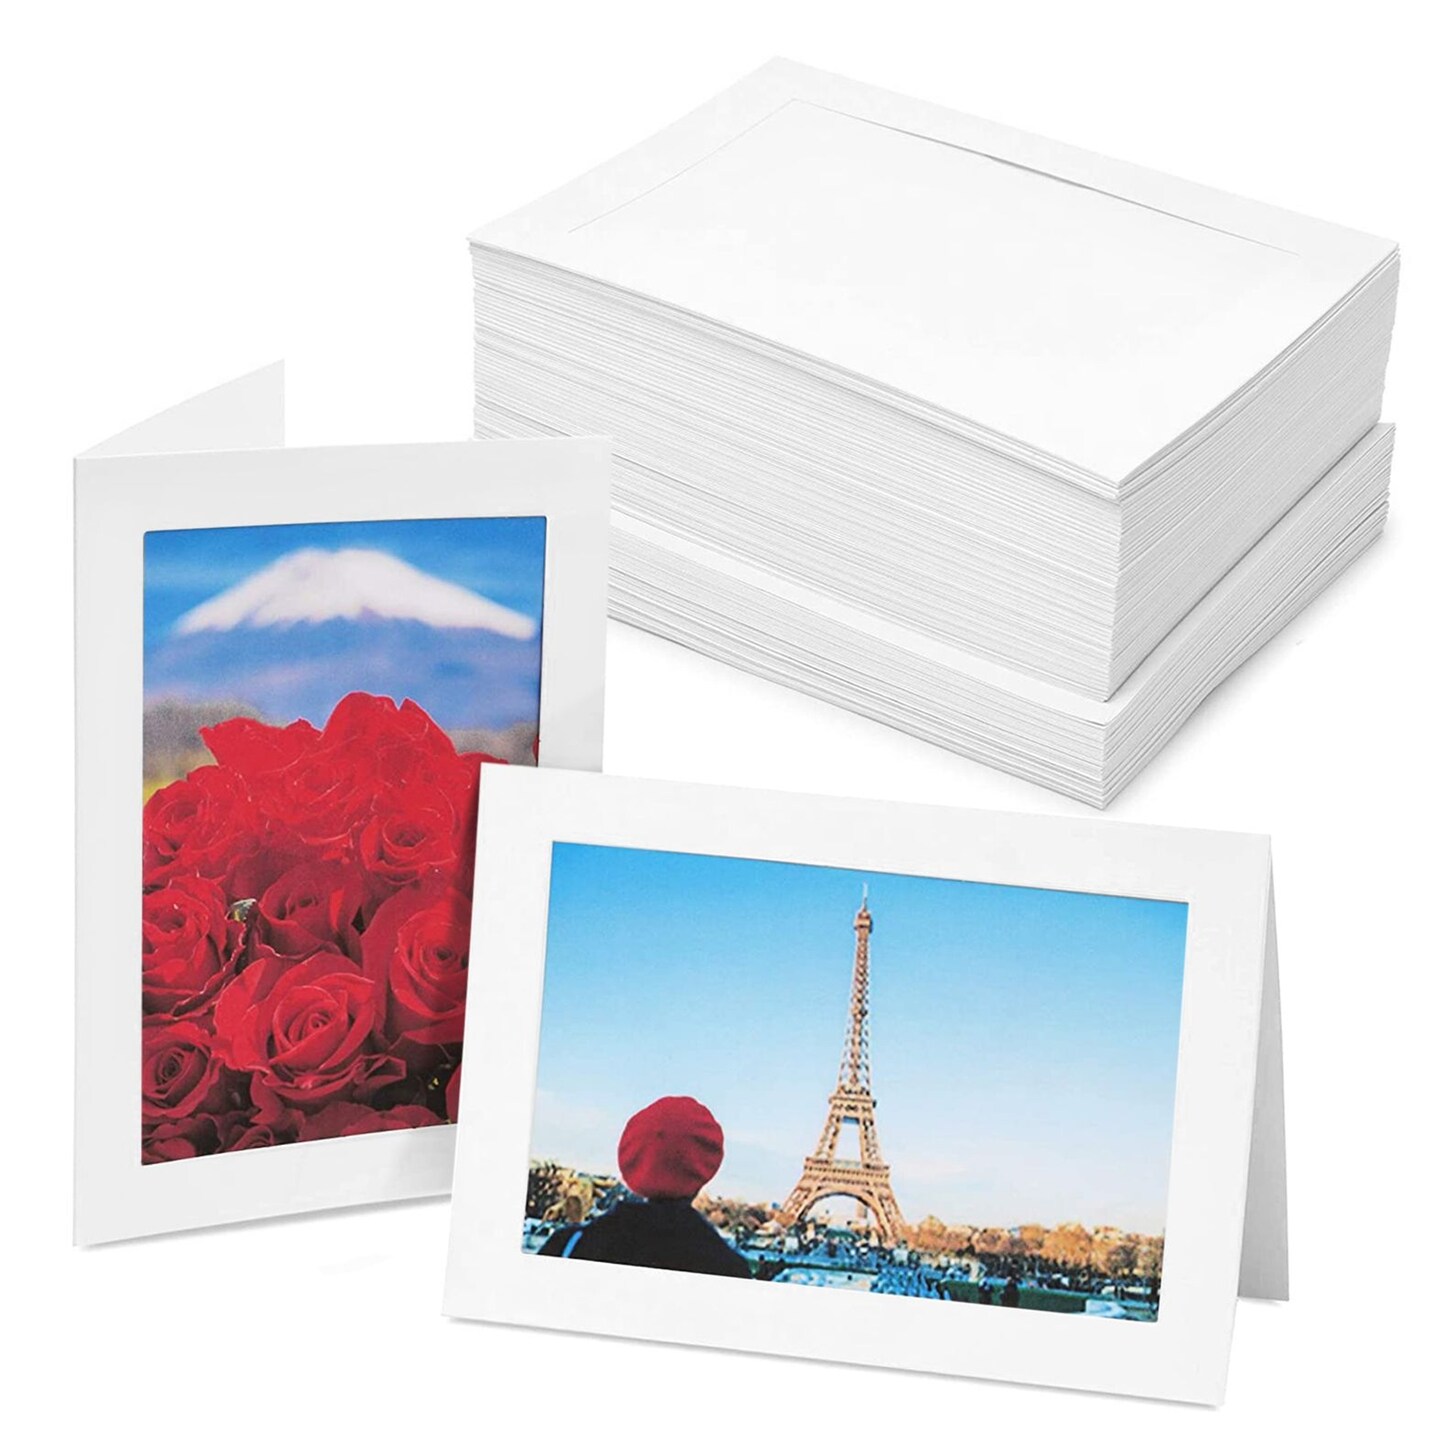 48 Pack Photo Frame Cards with Envelopes 4x6 - Paper Picture Frame for Photo Insert - Weddings, Graduations, Birthday, Anniversary (White)